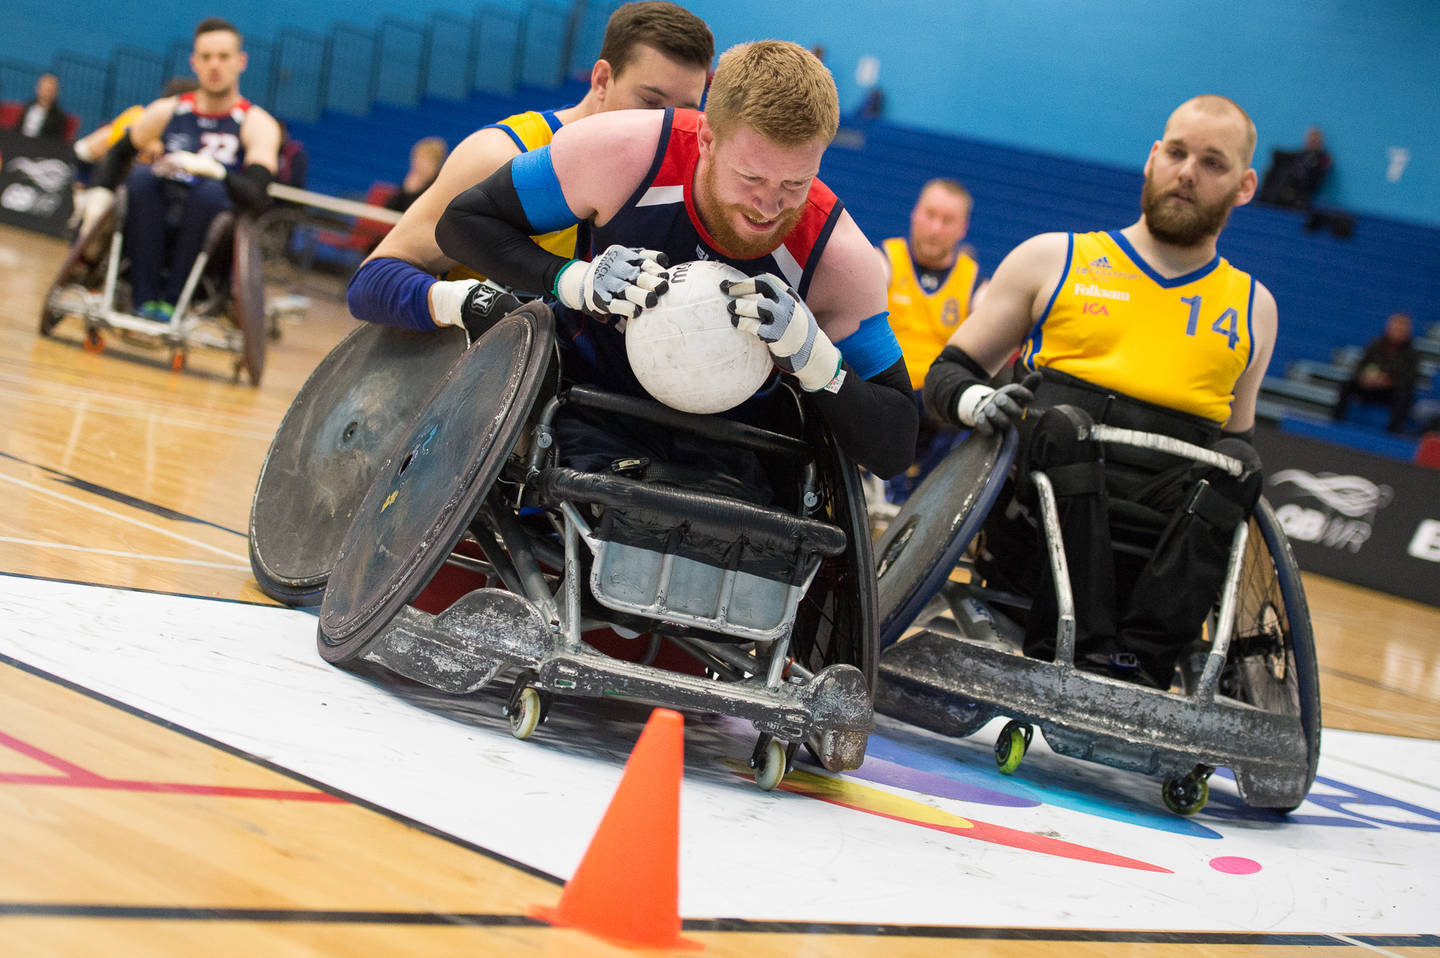 Wheelchair rugby game in action